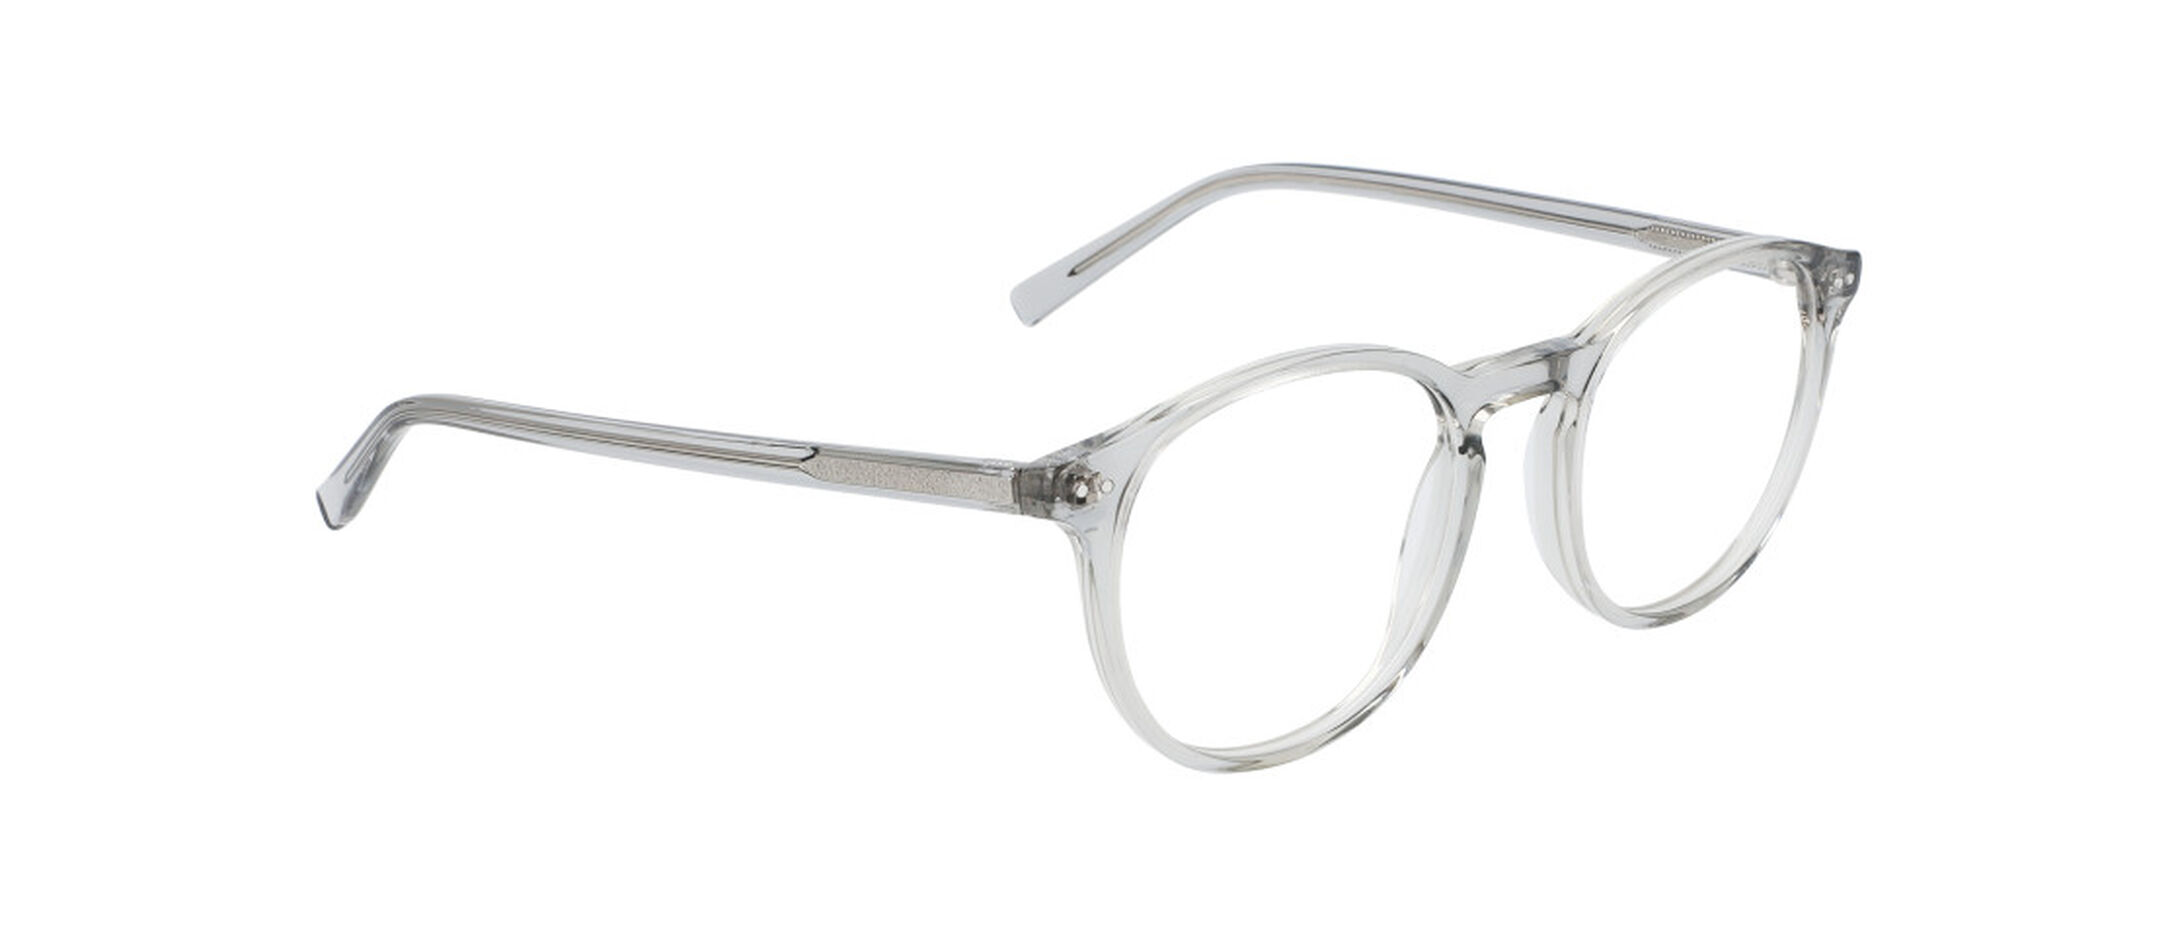 Marchon NYC M-8503 Glasses | Free Shipping and Returns | Eyeconic